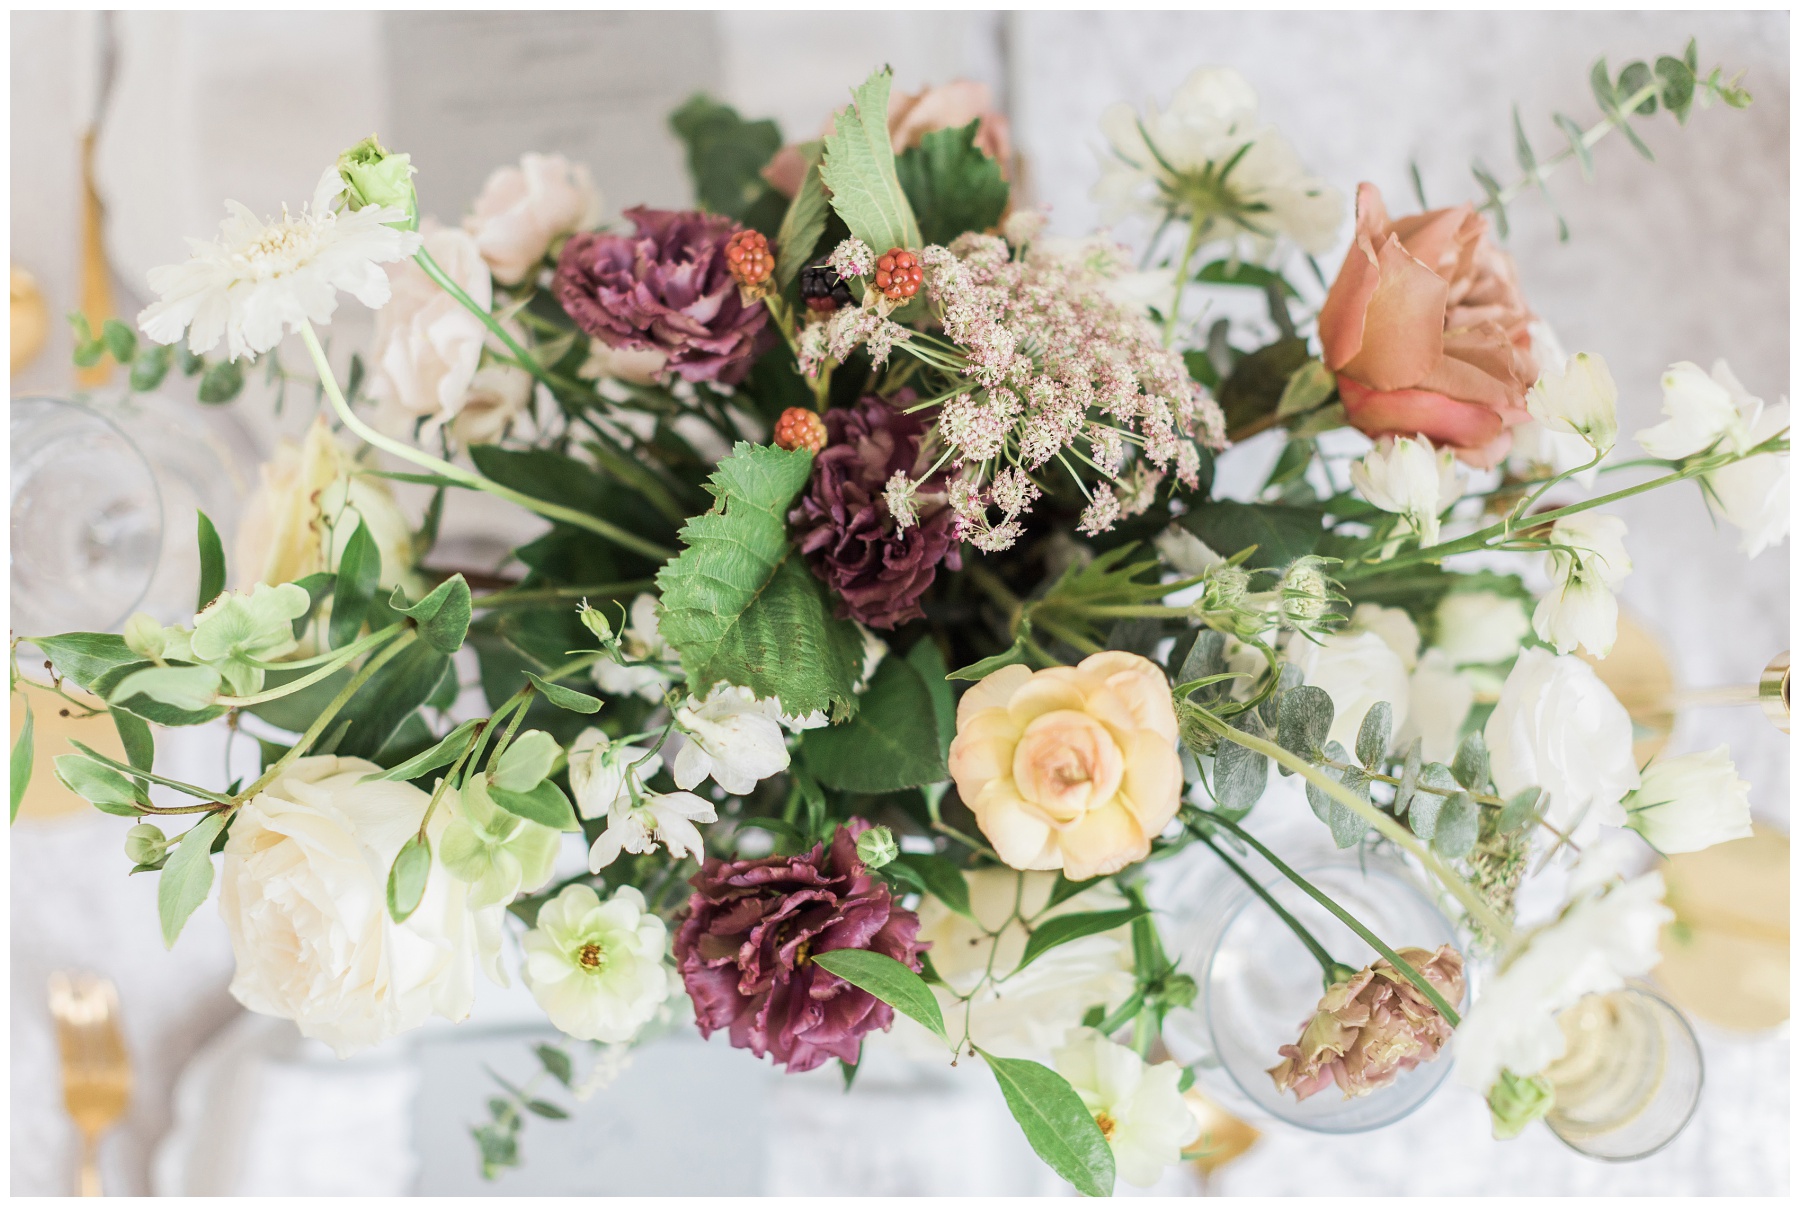 Lush bridal bouquet with garden roses, scabiosa, hellebore and greenery